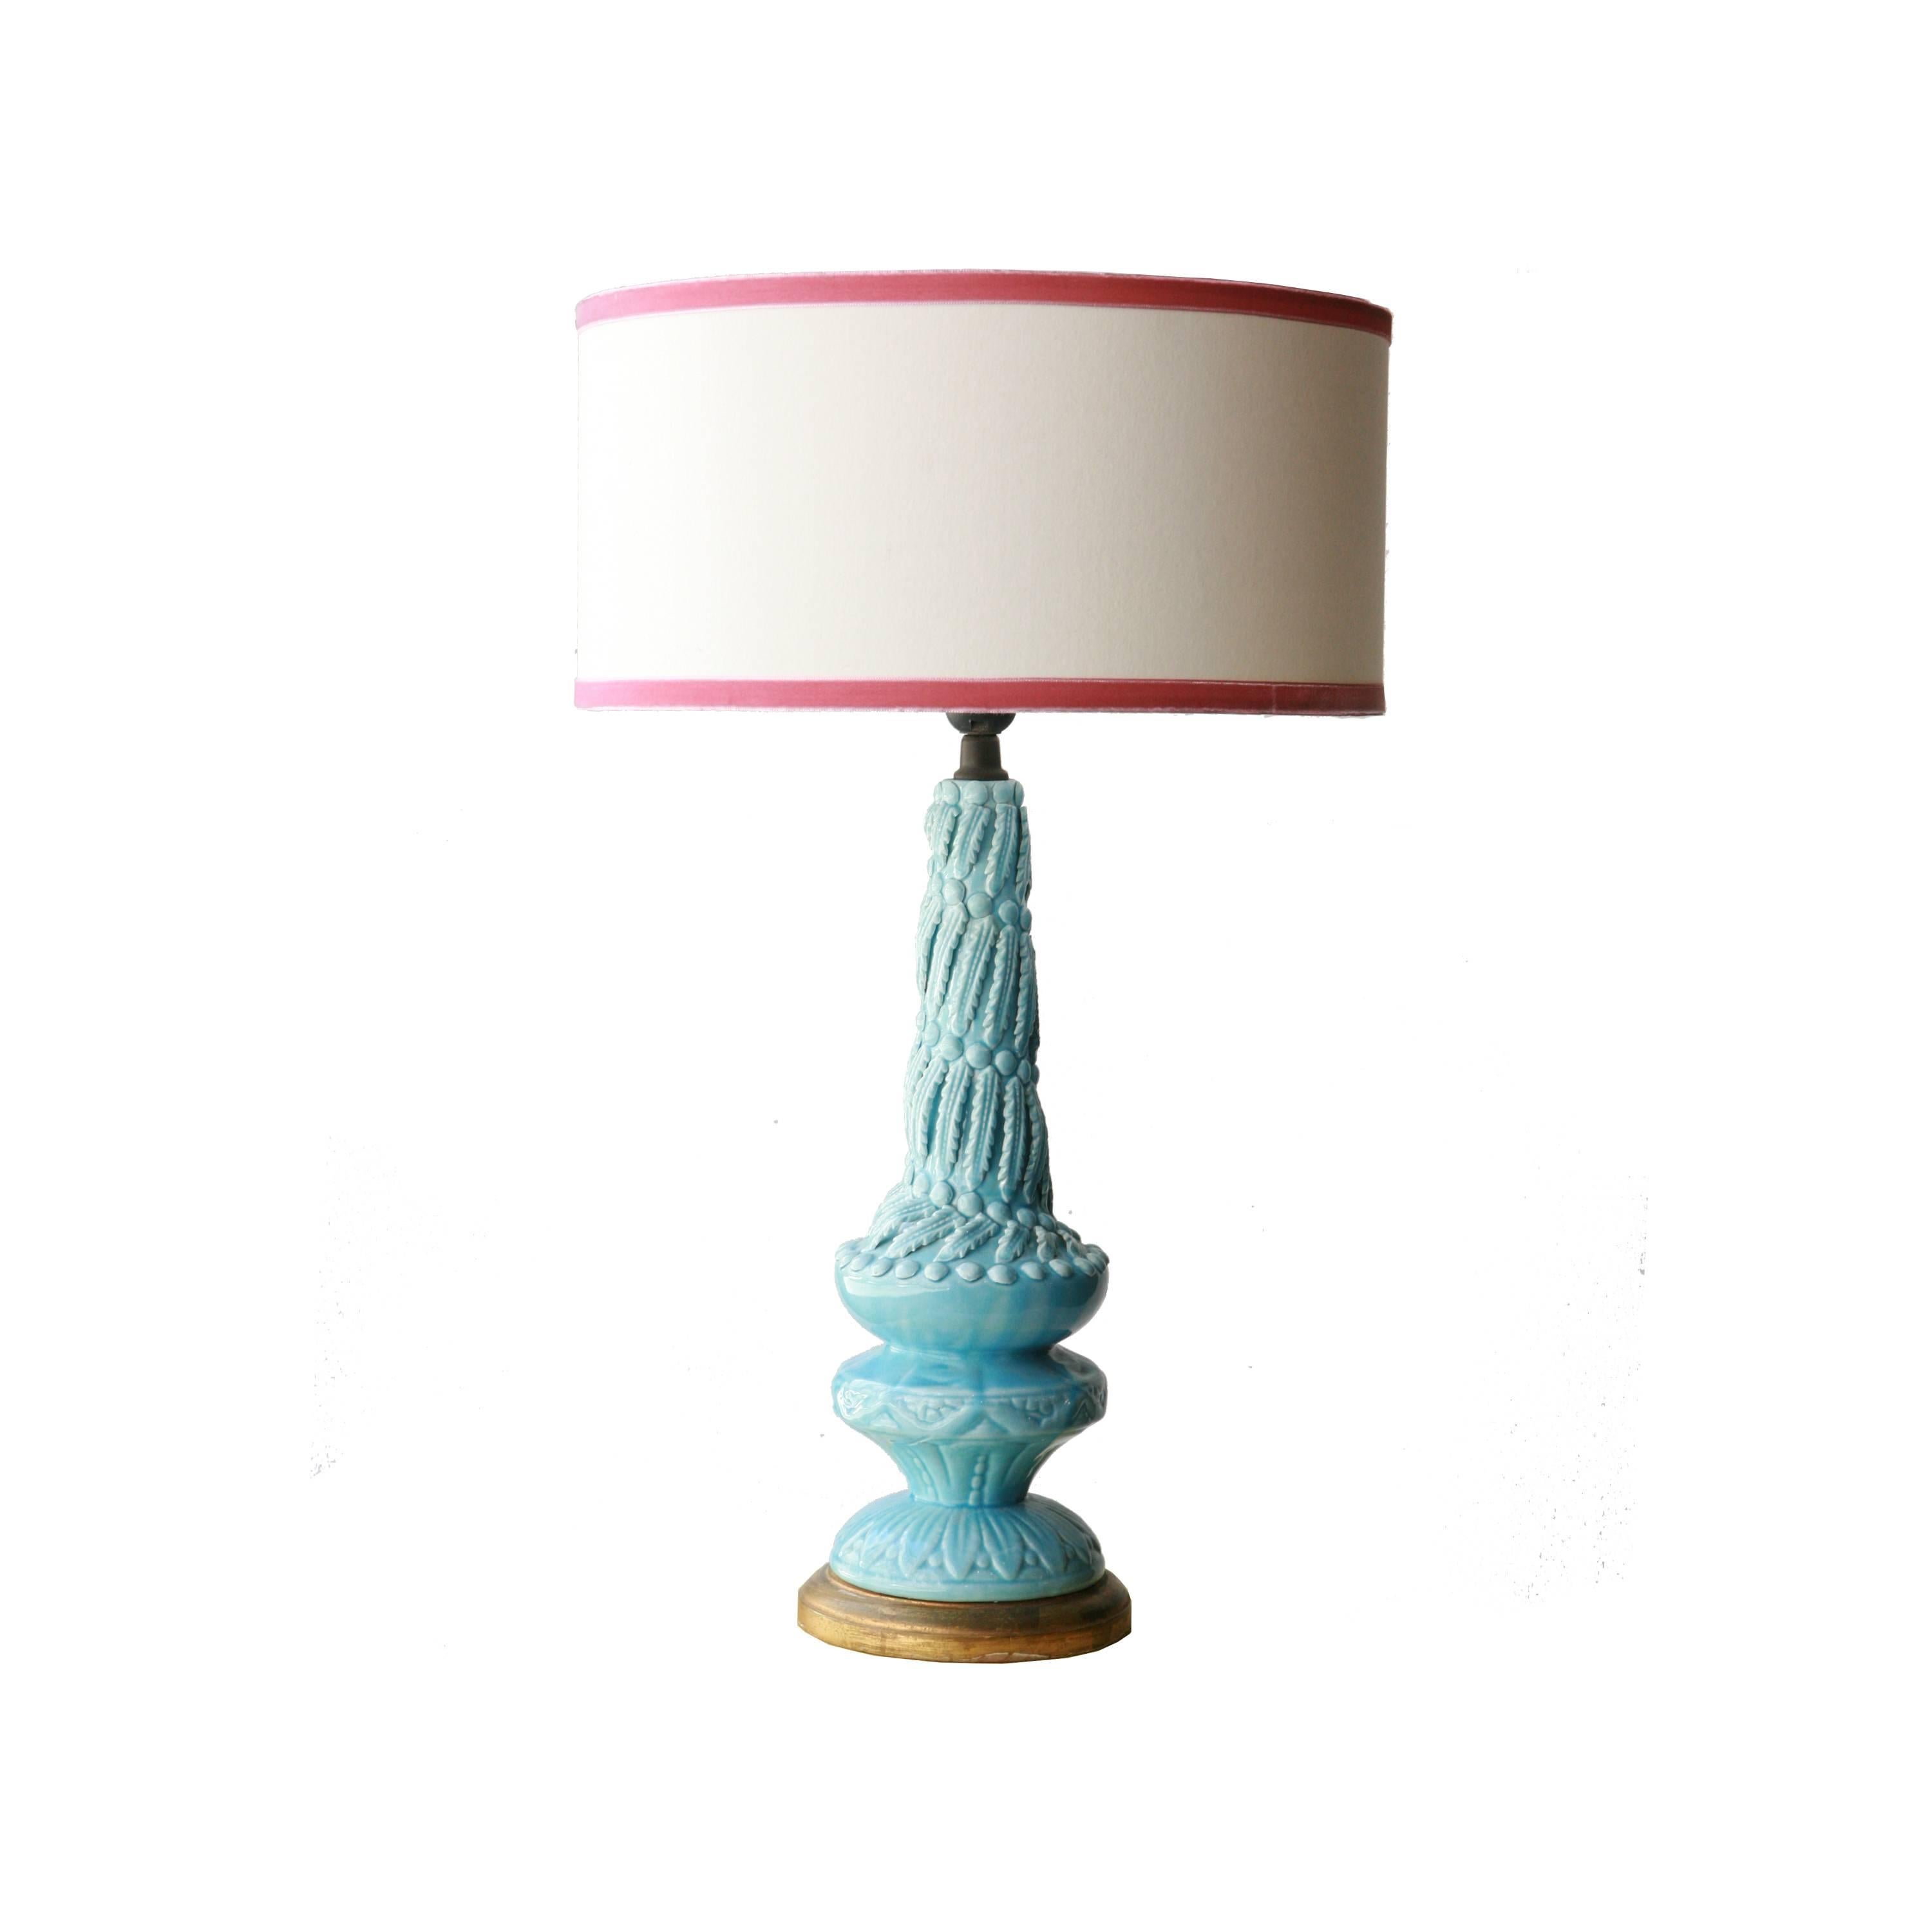 Pair of table lamps with ceramic structure of Manises glazed realized of artisan form.